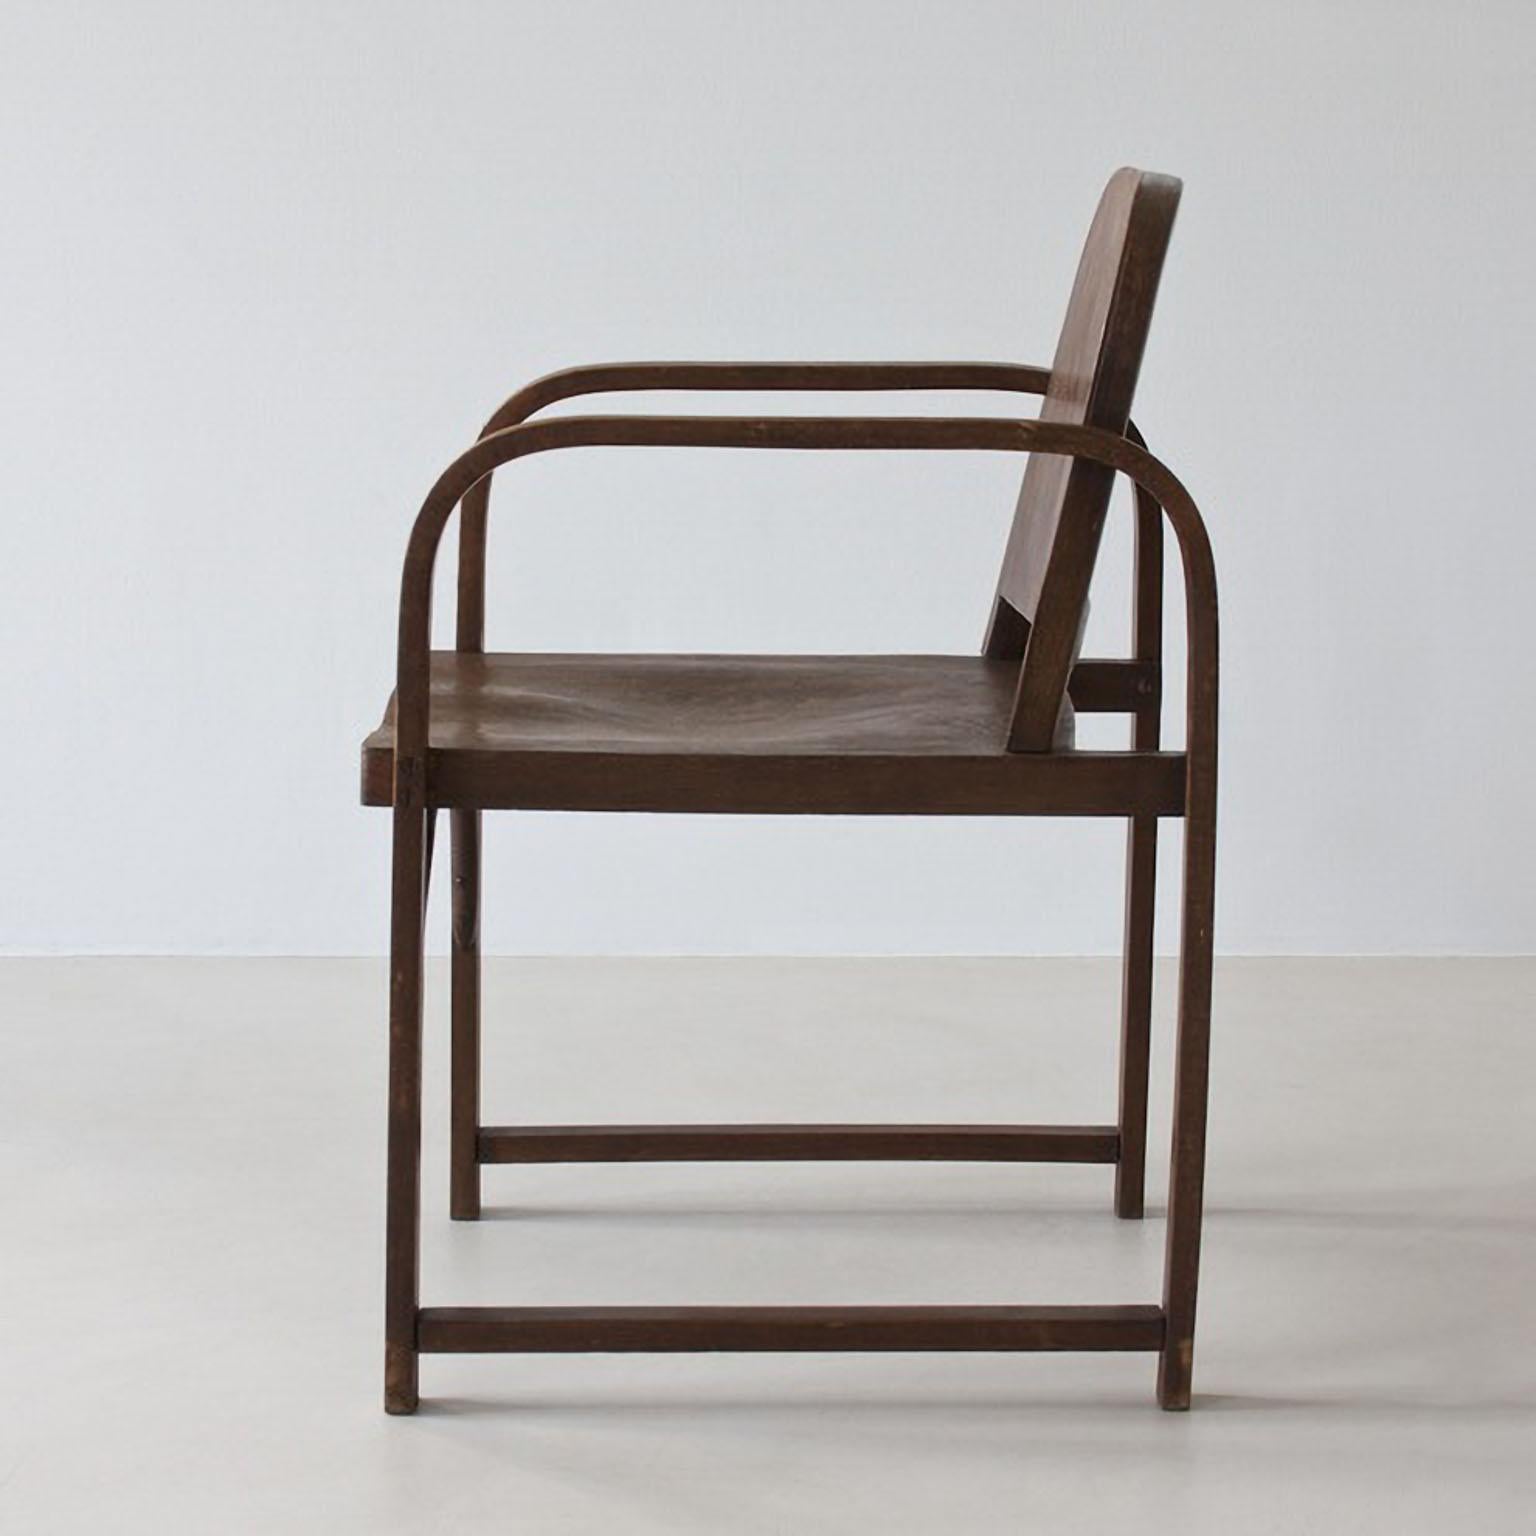 Slovak Modernist Thonet A 745/F Armchair manufactured by Tatra, Stained Wood, c. 1930 For Sale